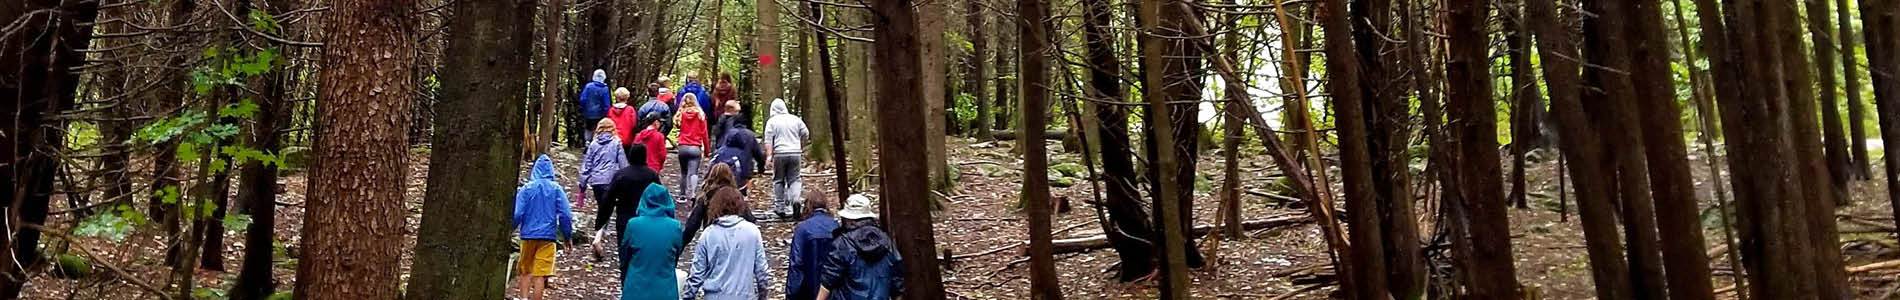 a group of children hike on a trail through a mature forest at the Frink Conservation Area